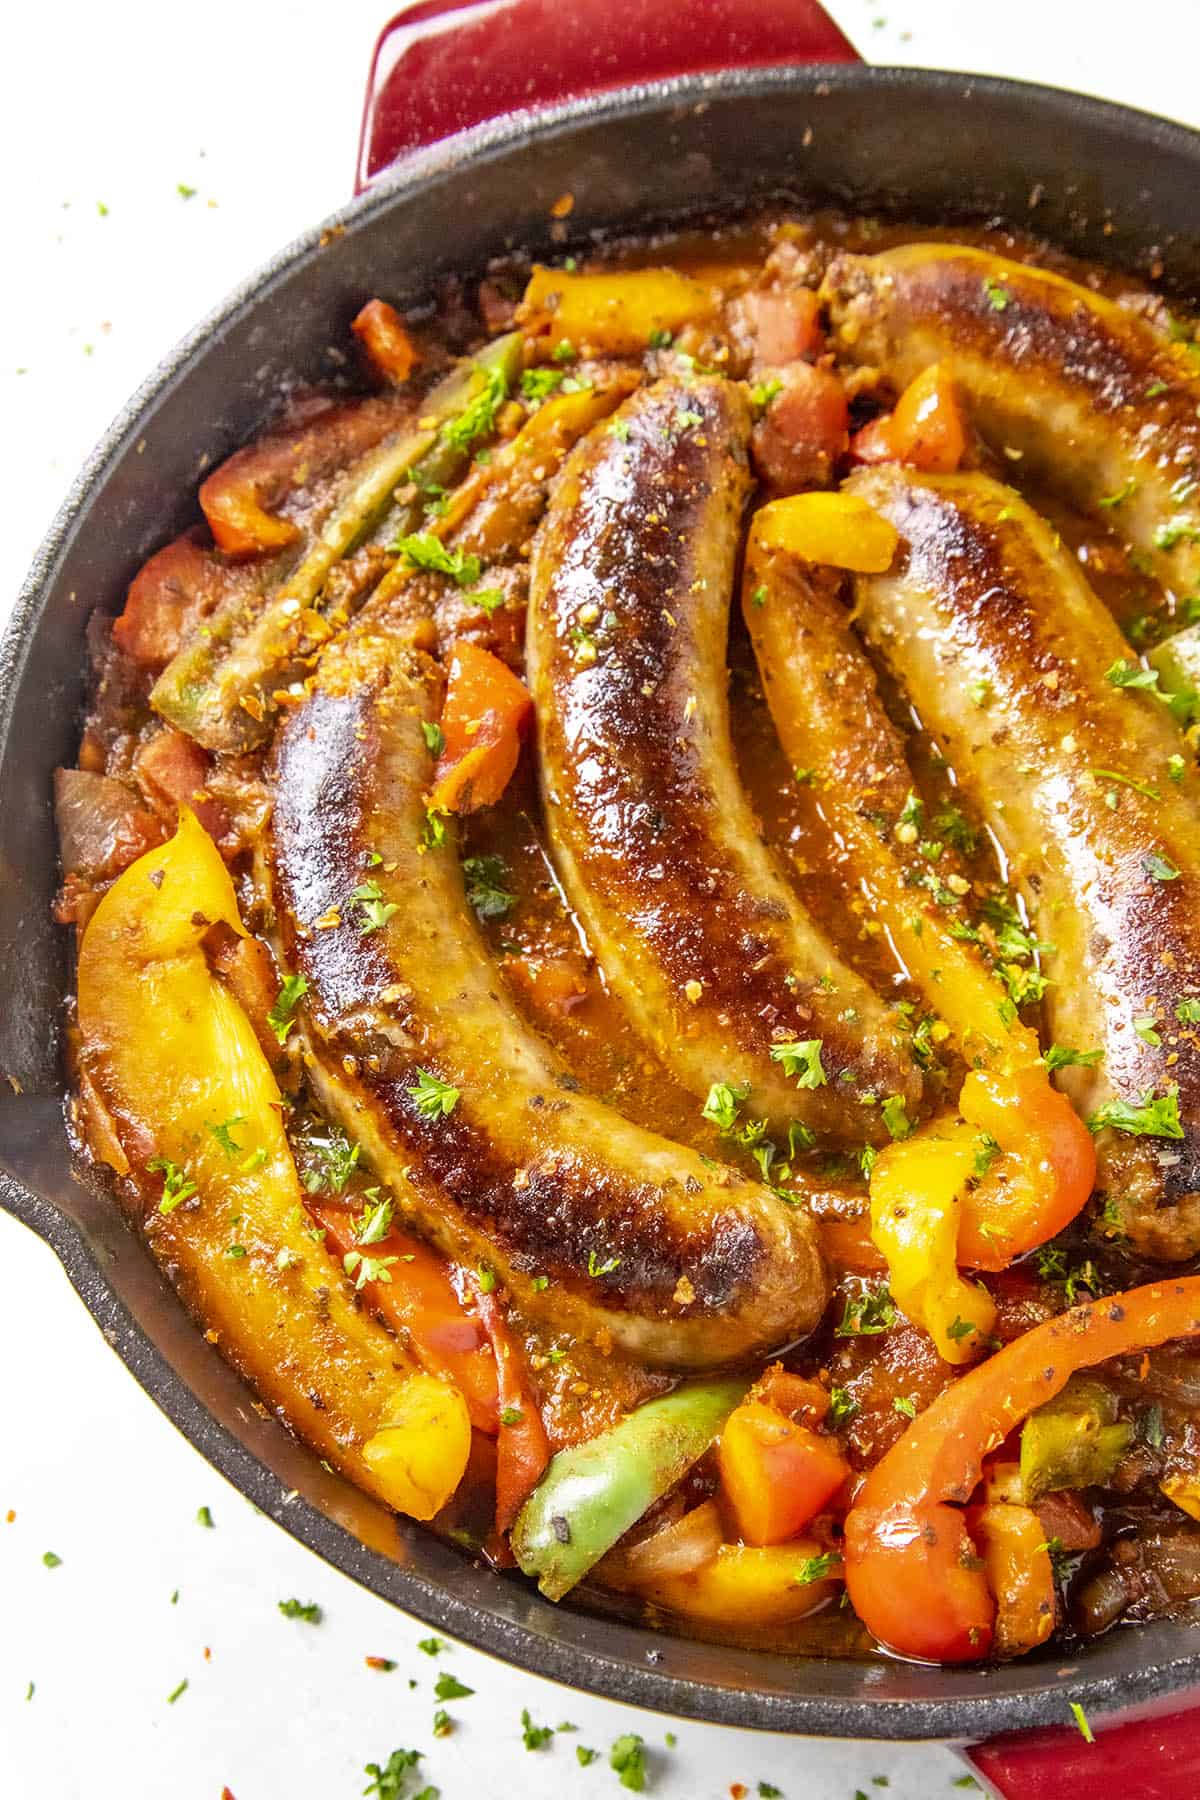 Sausage and Peppers in a hot pan with chili flakes and chopped green herbs.